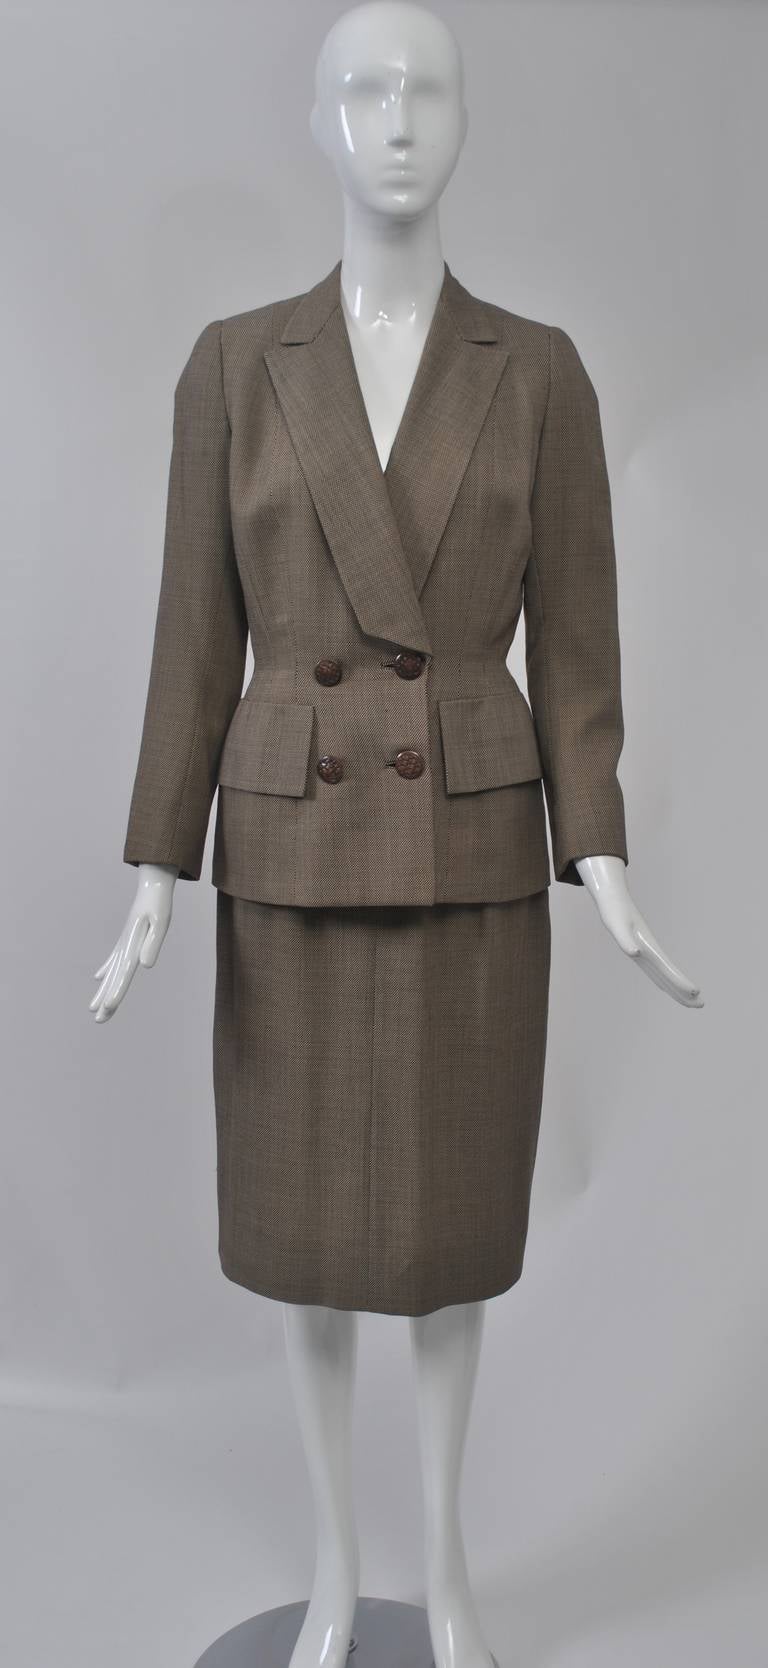 Immaculate styling is the hallmark of this 1950s suit fashioned of a fine brown and white tweed wool. The long blazer-style jacket features a notched shawl collar cut diagonally at bottom, large pocket flaps at the hips and double-breasted buttons